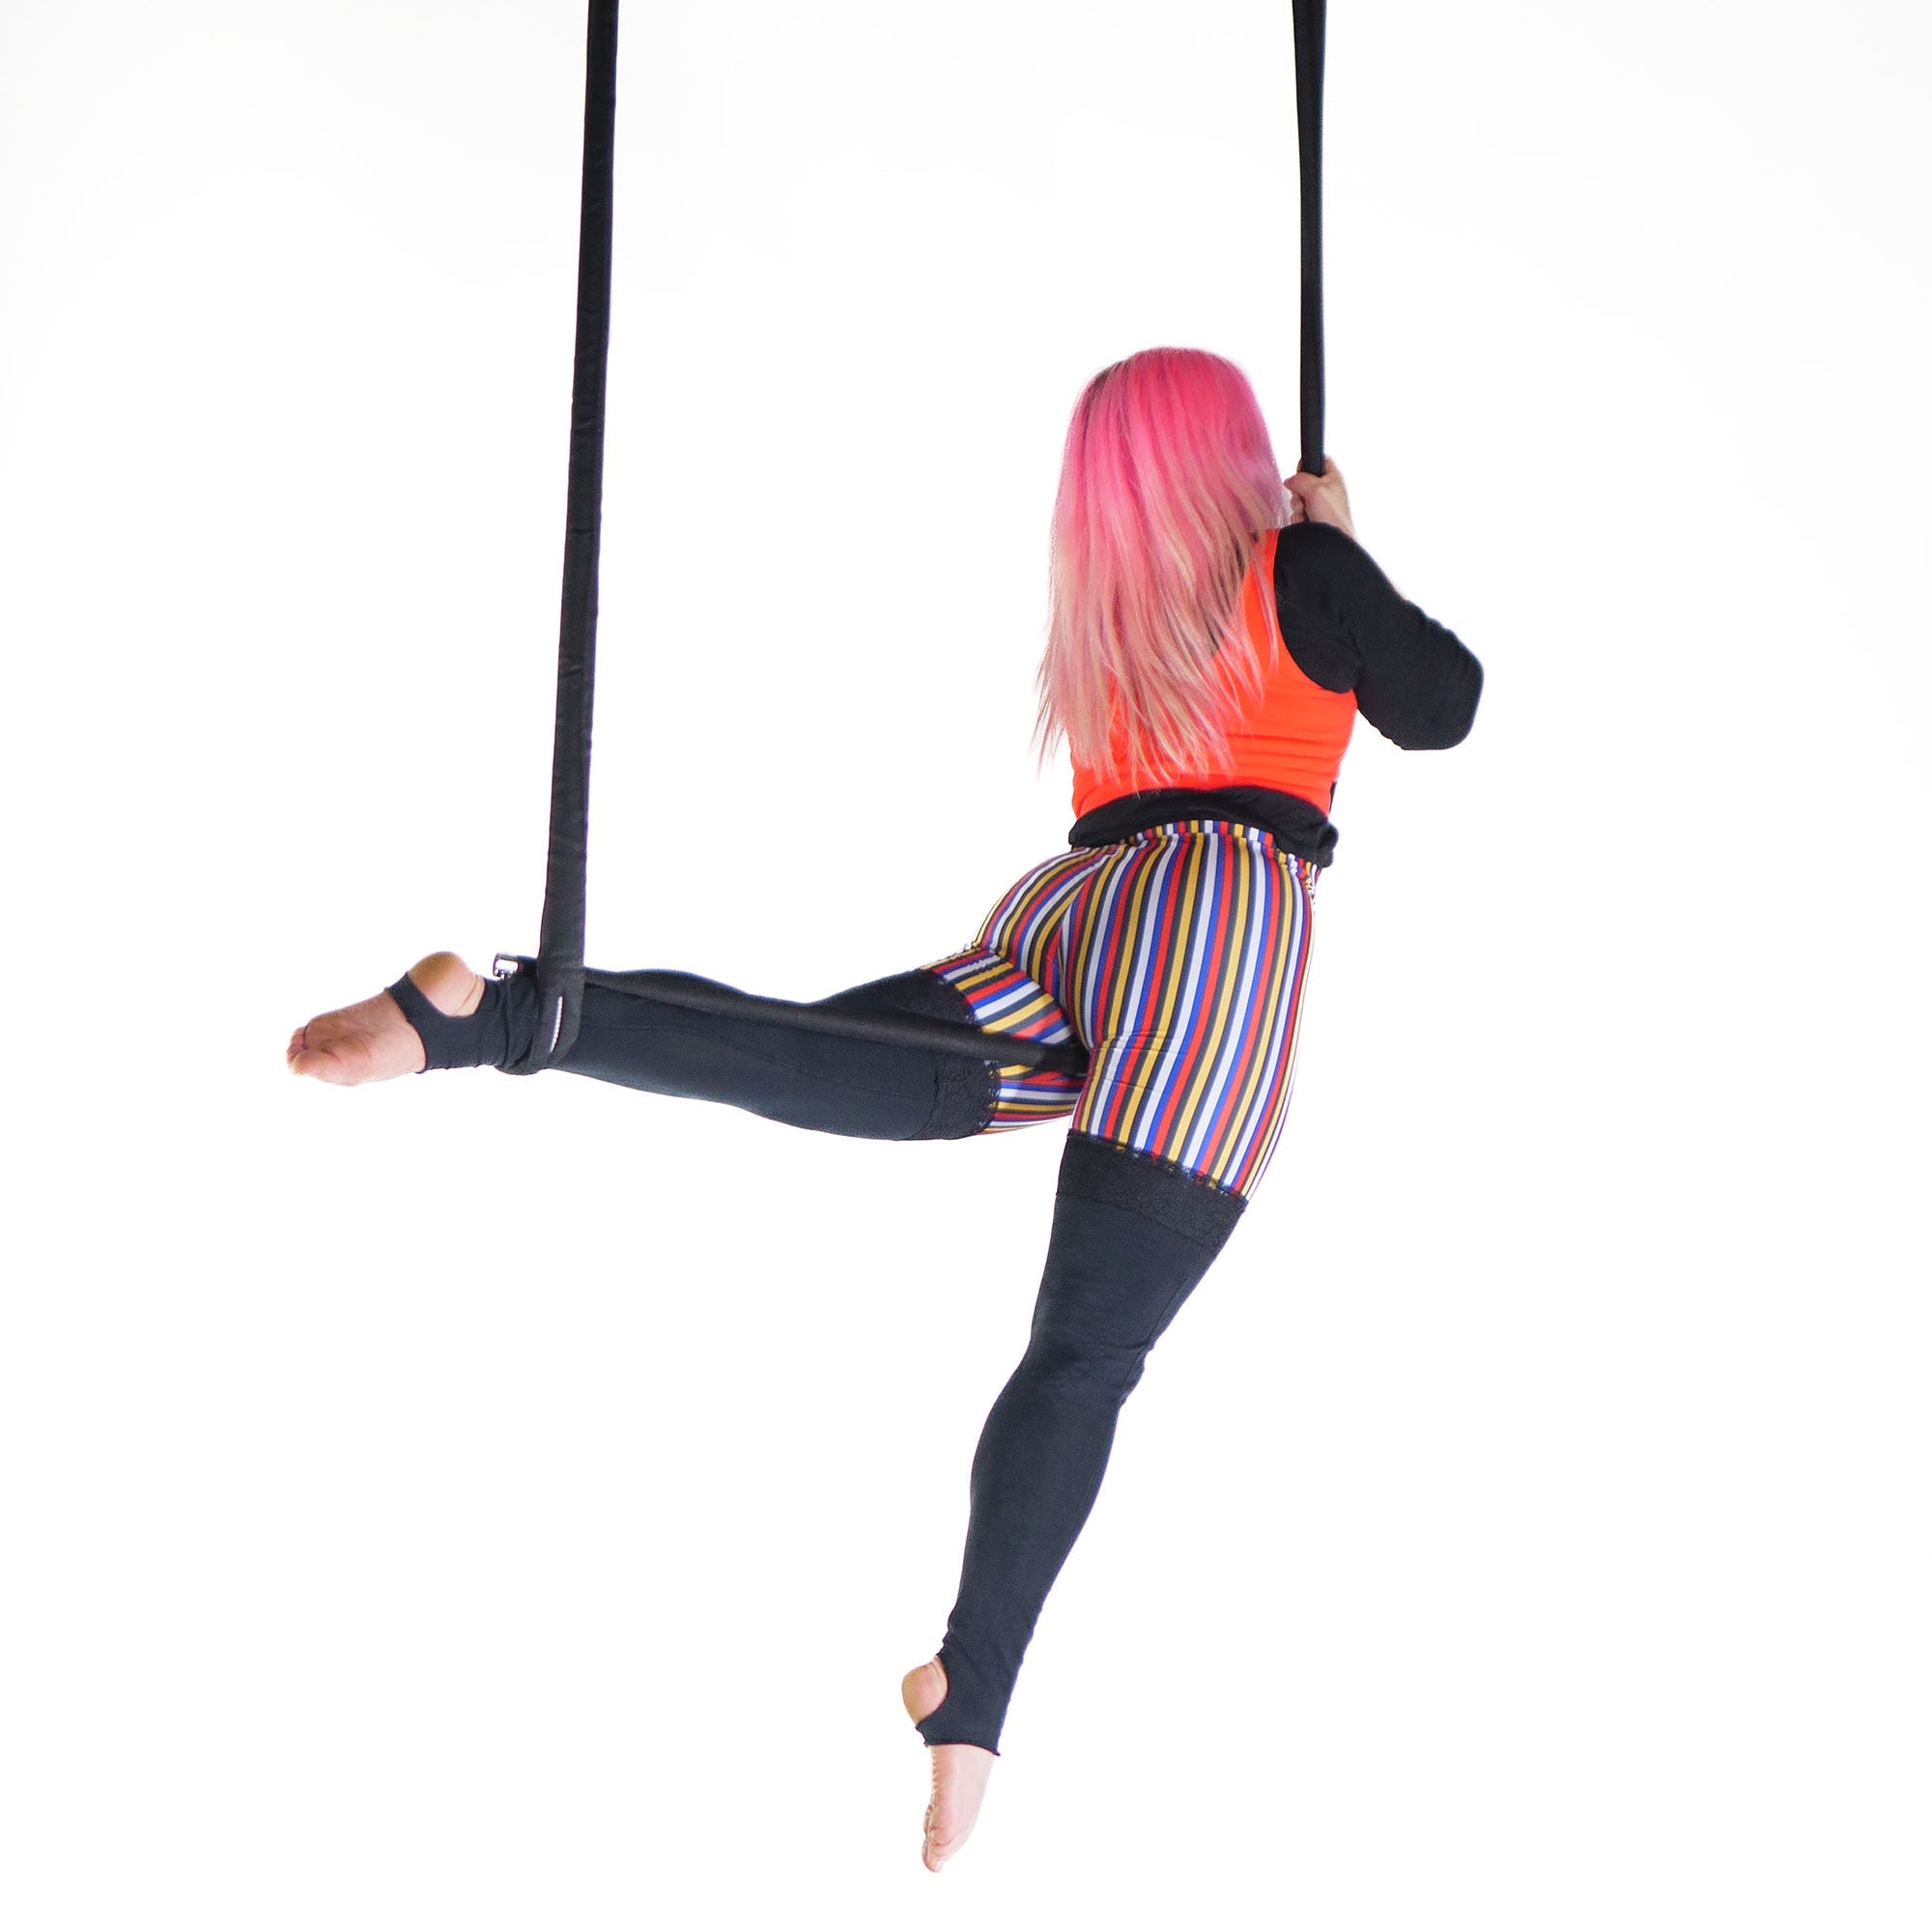 performer on shackle trapeze